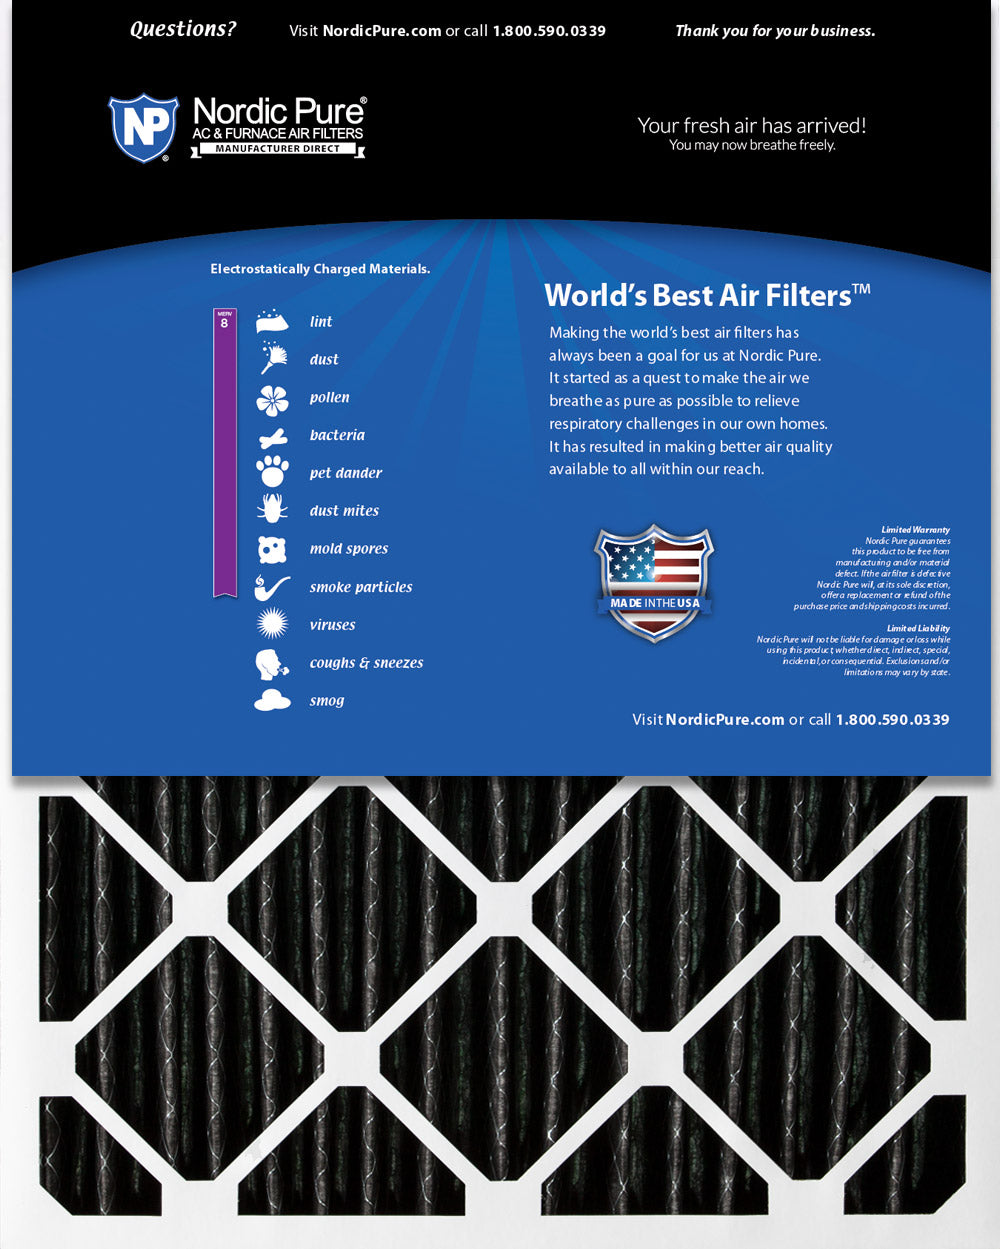 16x24x4 (3 5/8) Furnace Air Filters MERV 8 Pleated Plus Carbon